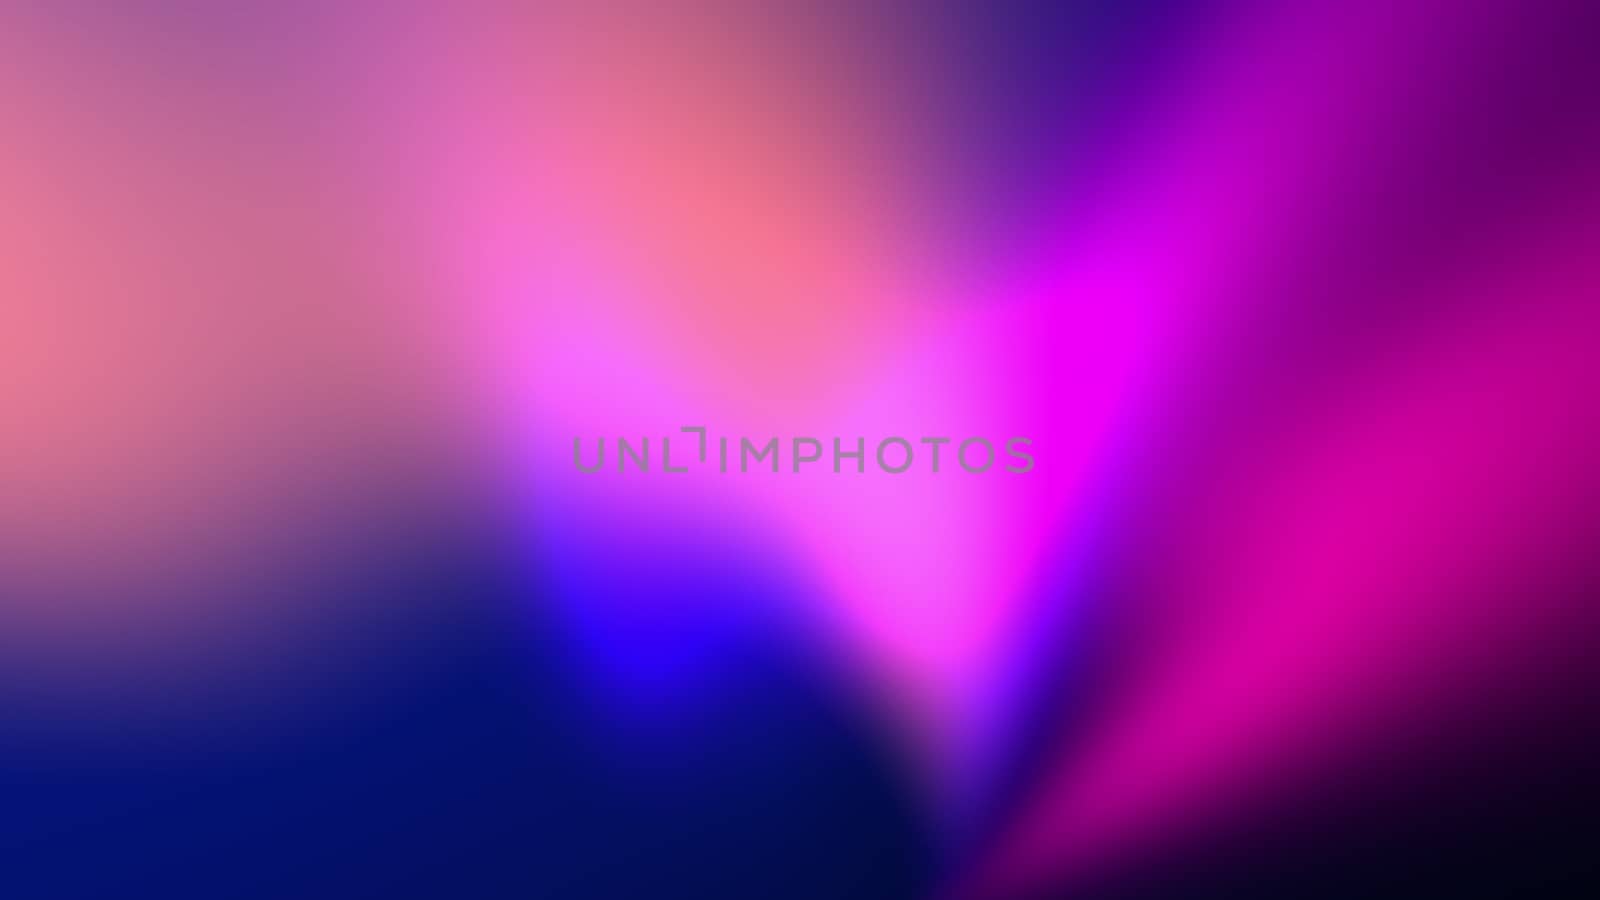 Shine wave background with lines, modern abstract 3d rendering, computer generated backdrop